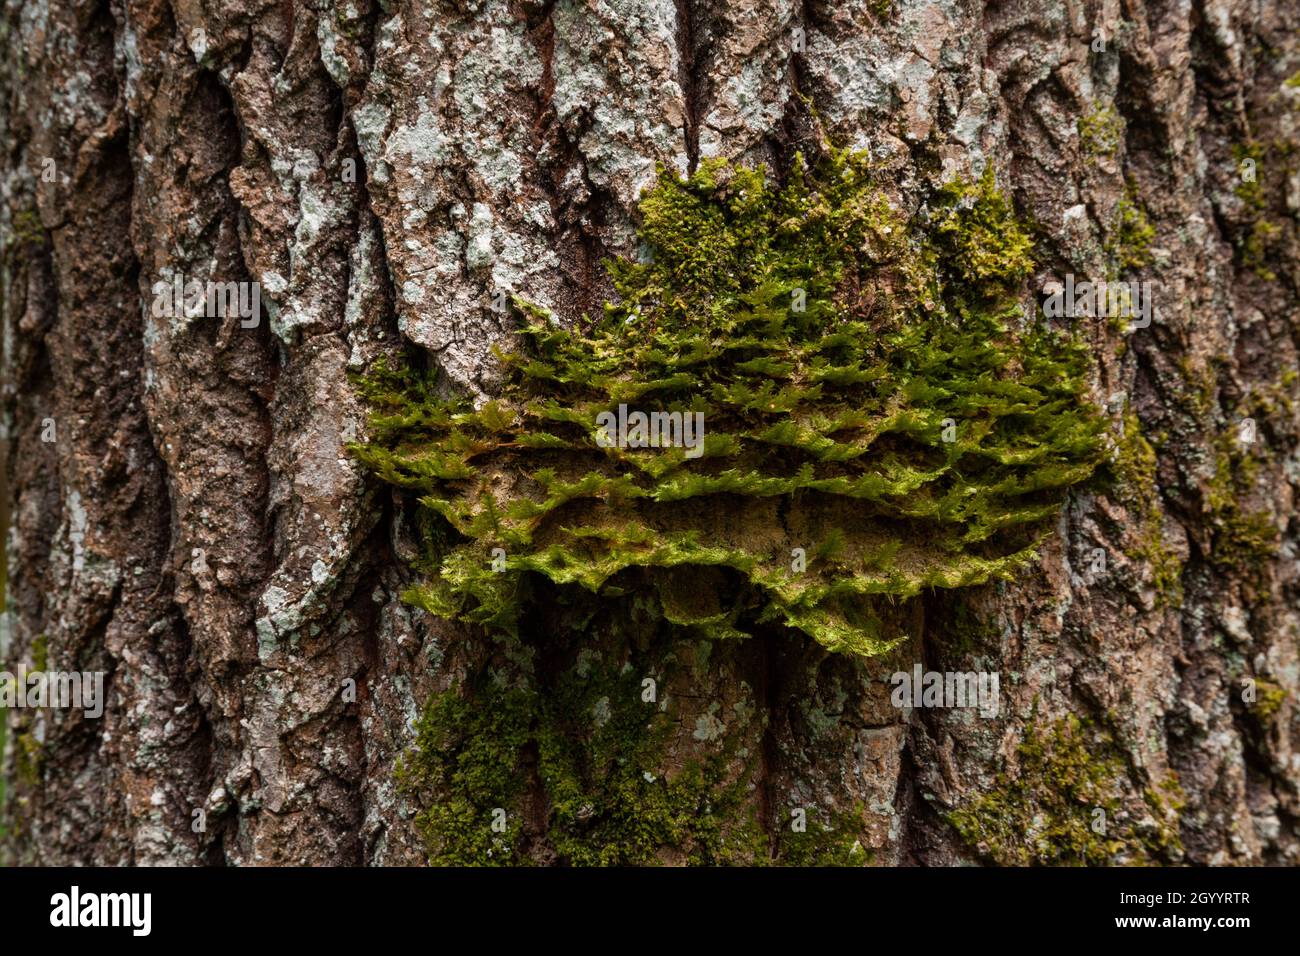 Neckera pennata growing on an Aspen bark in an old-growth forest. Neckera pennata is a species of moss belonging to the family Neckeraceae. Stock Photo